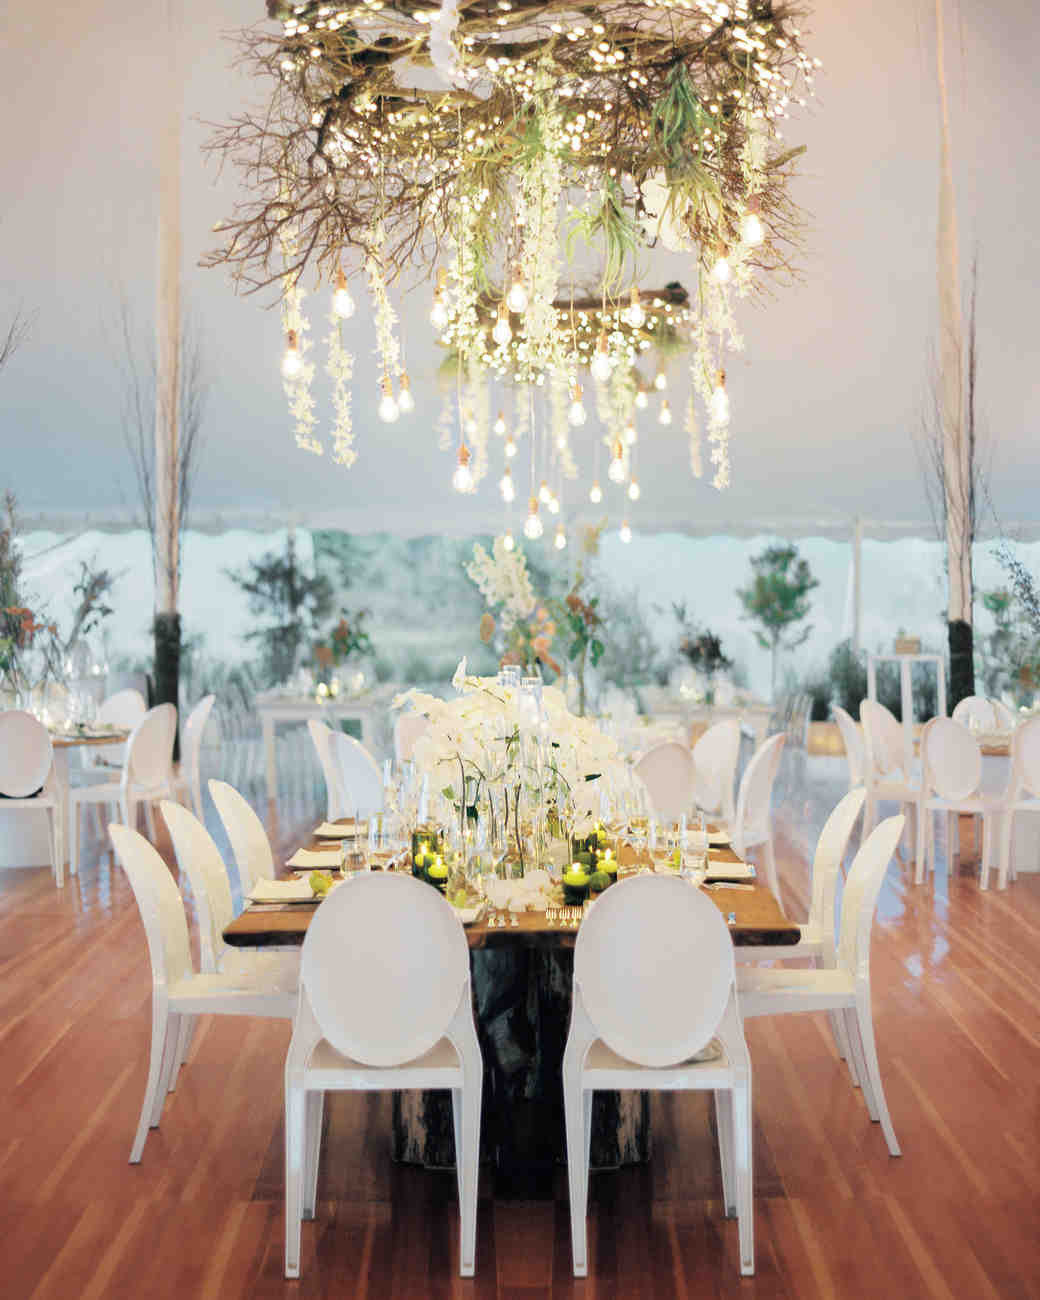 Wedding Tables Decorations
 33 Tent Decorating Ideas to Upgrade Your Wedding Reception